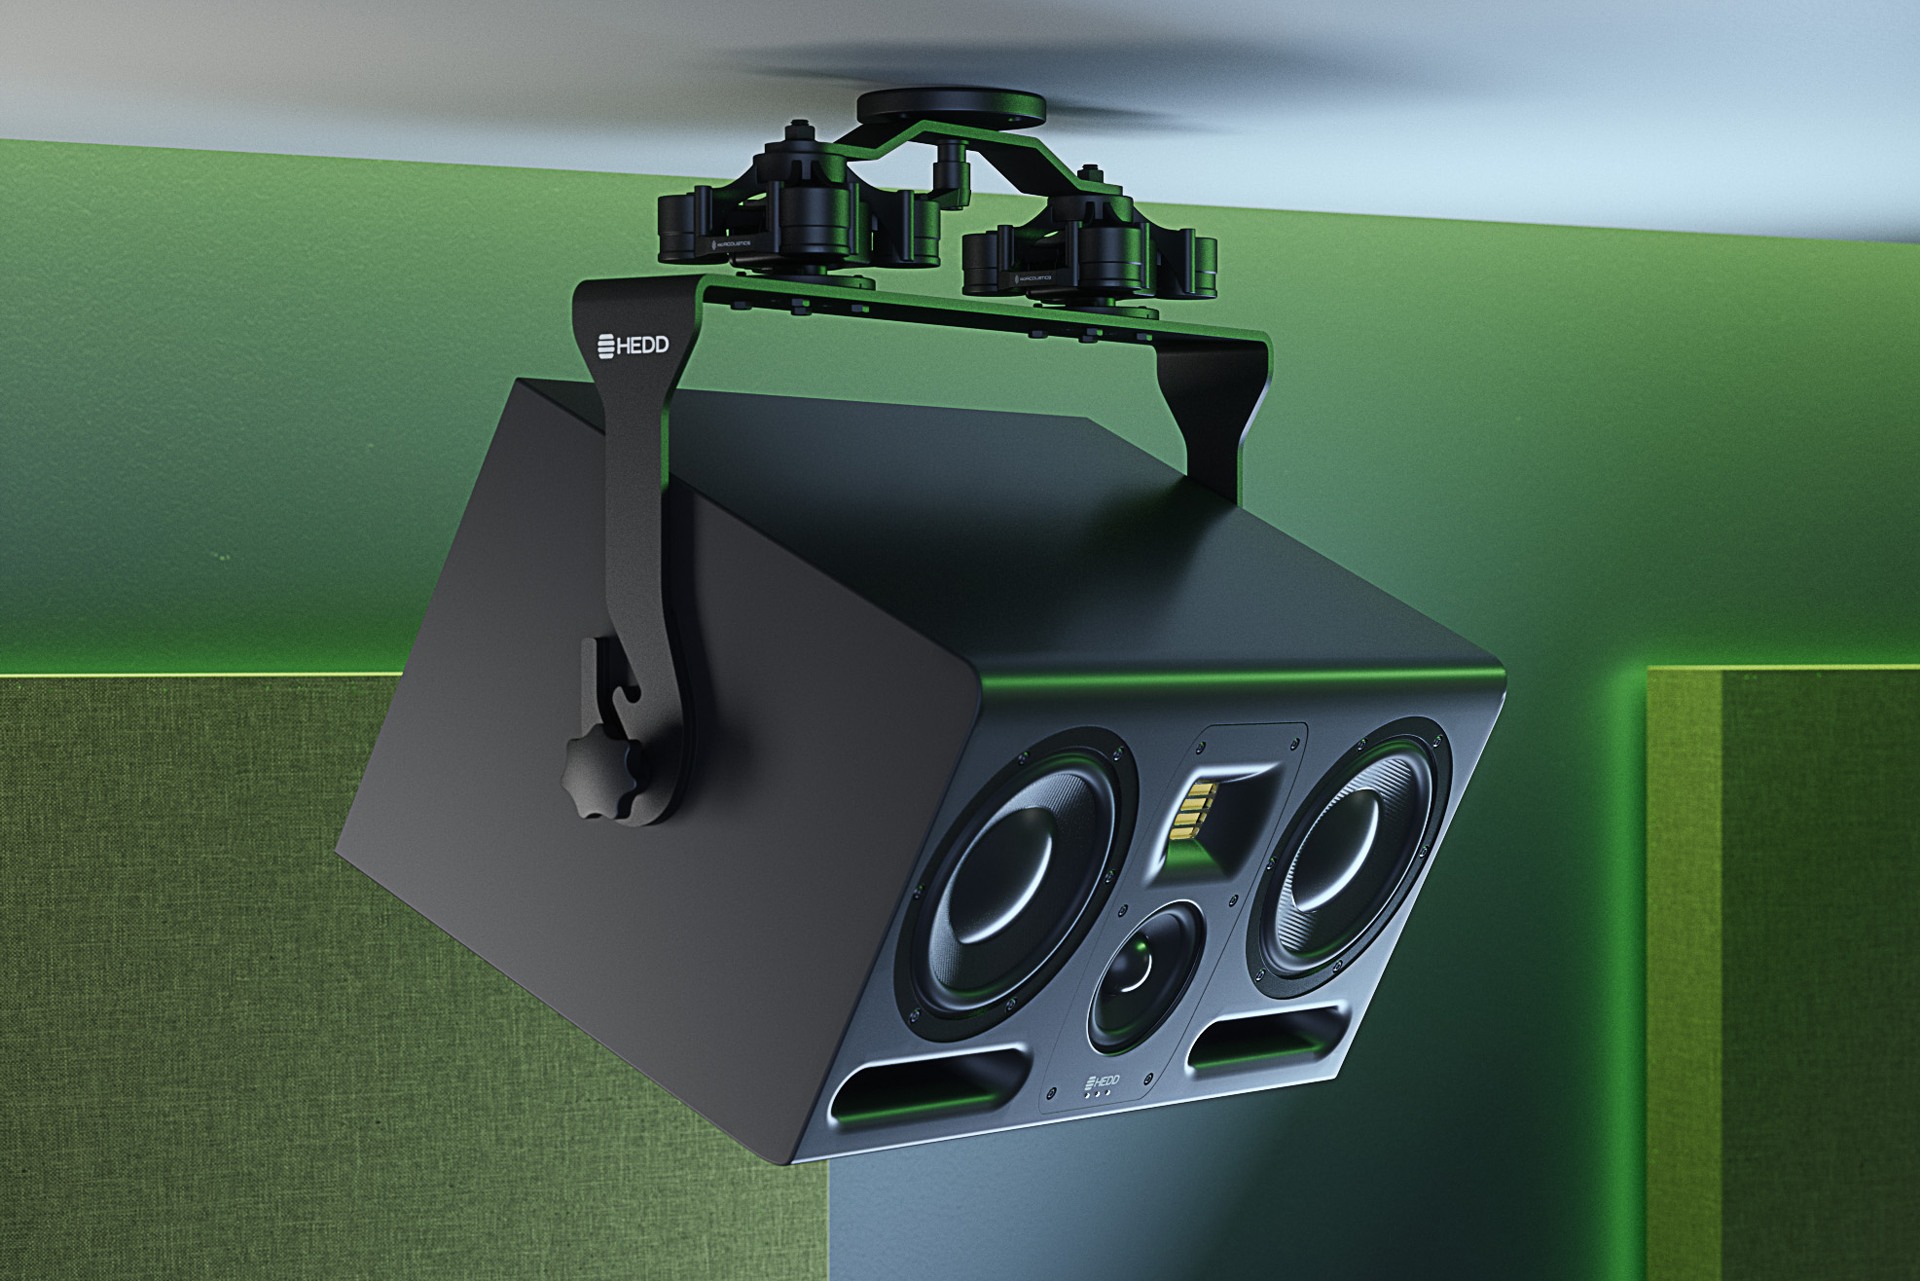 IsoAcoustics have teamed up with German studio monitor manufacturer HEDD to provide mounting solutions for their speakers.